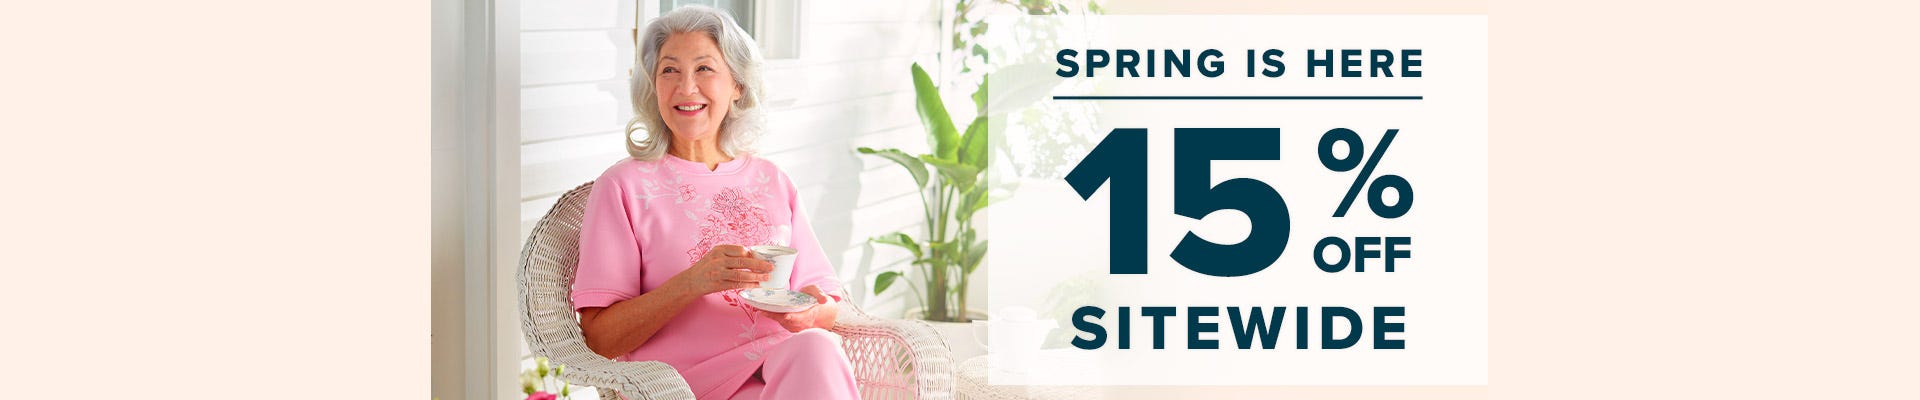 Spring Is Here - 15% Off Sitewide